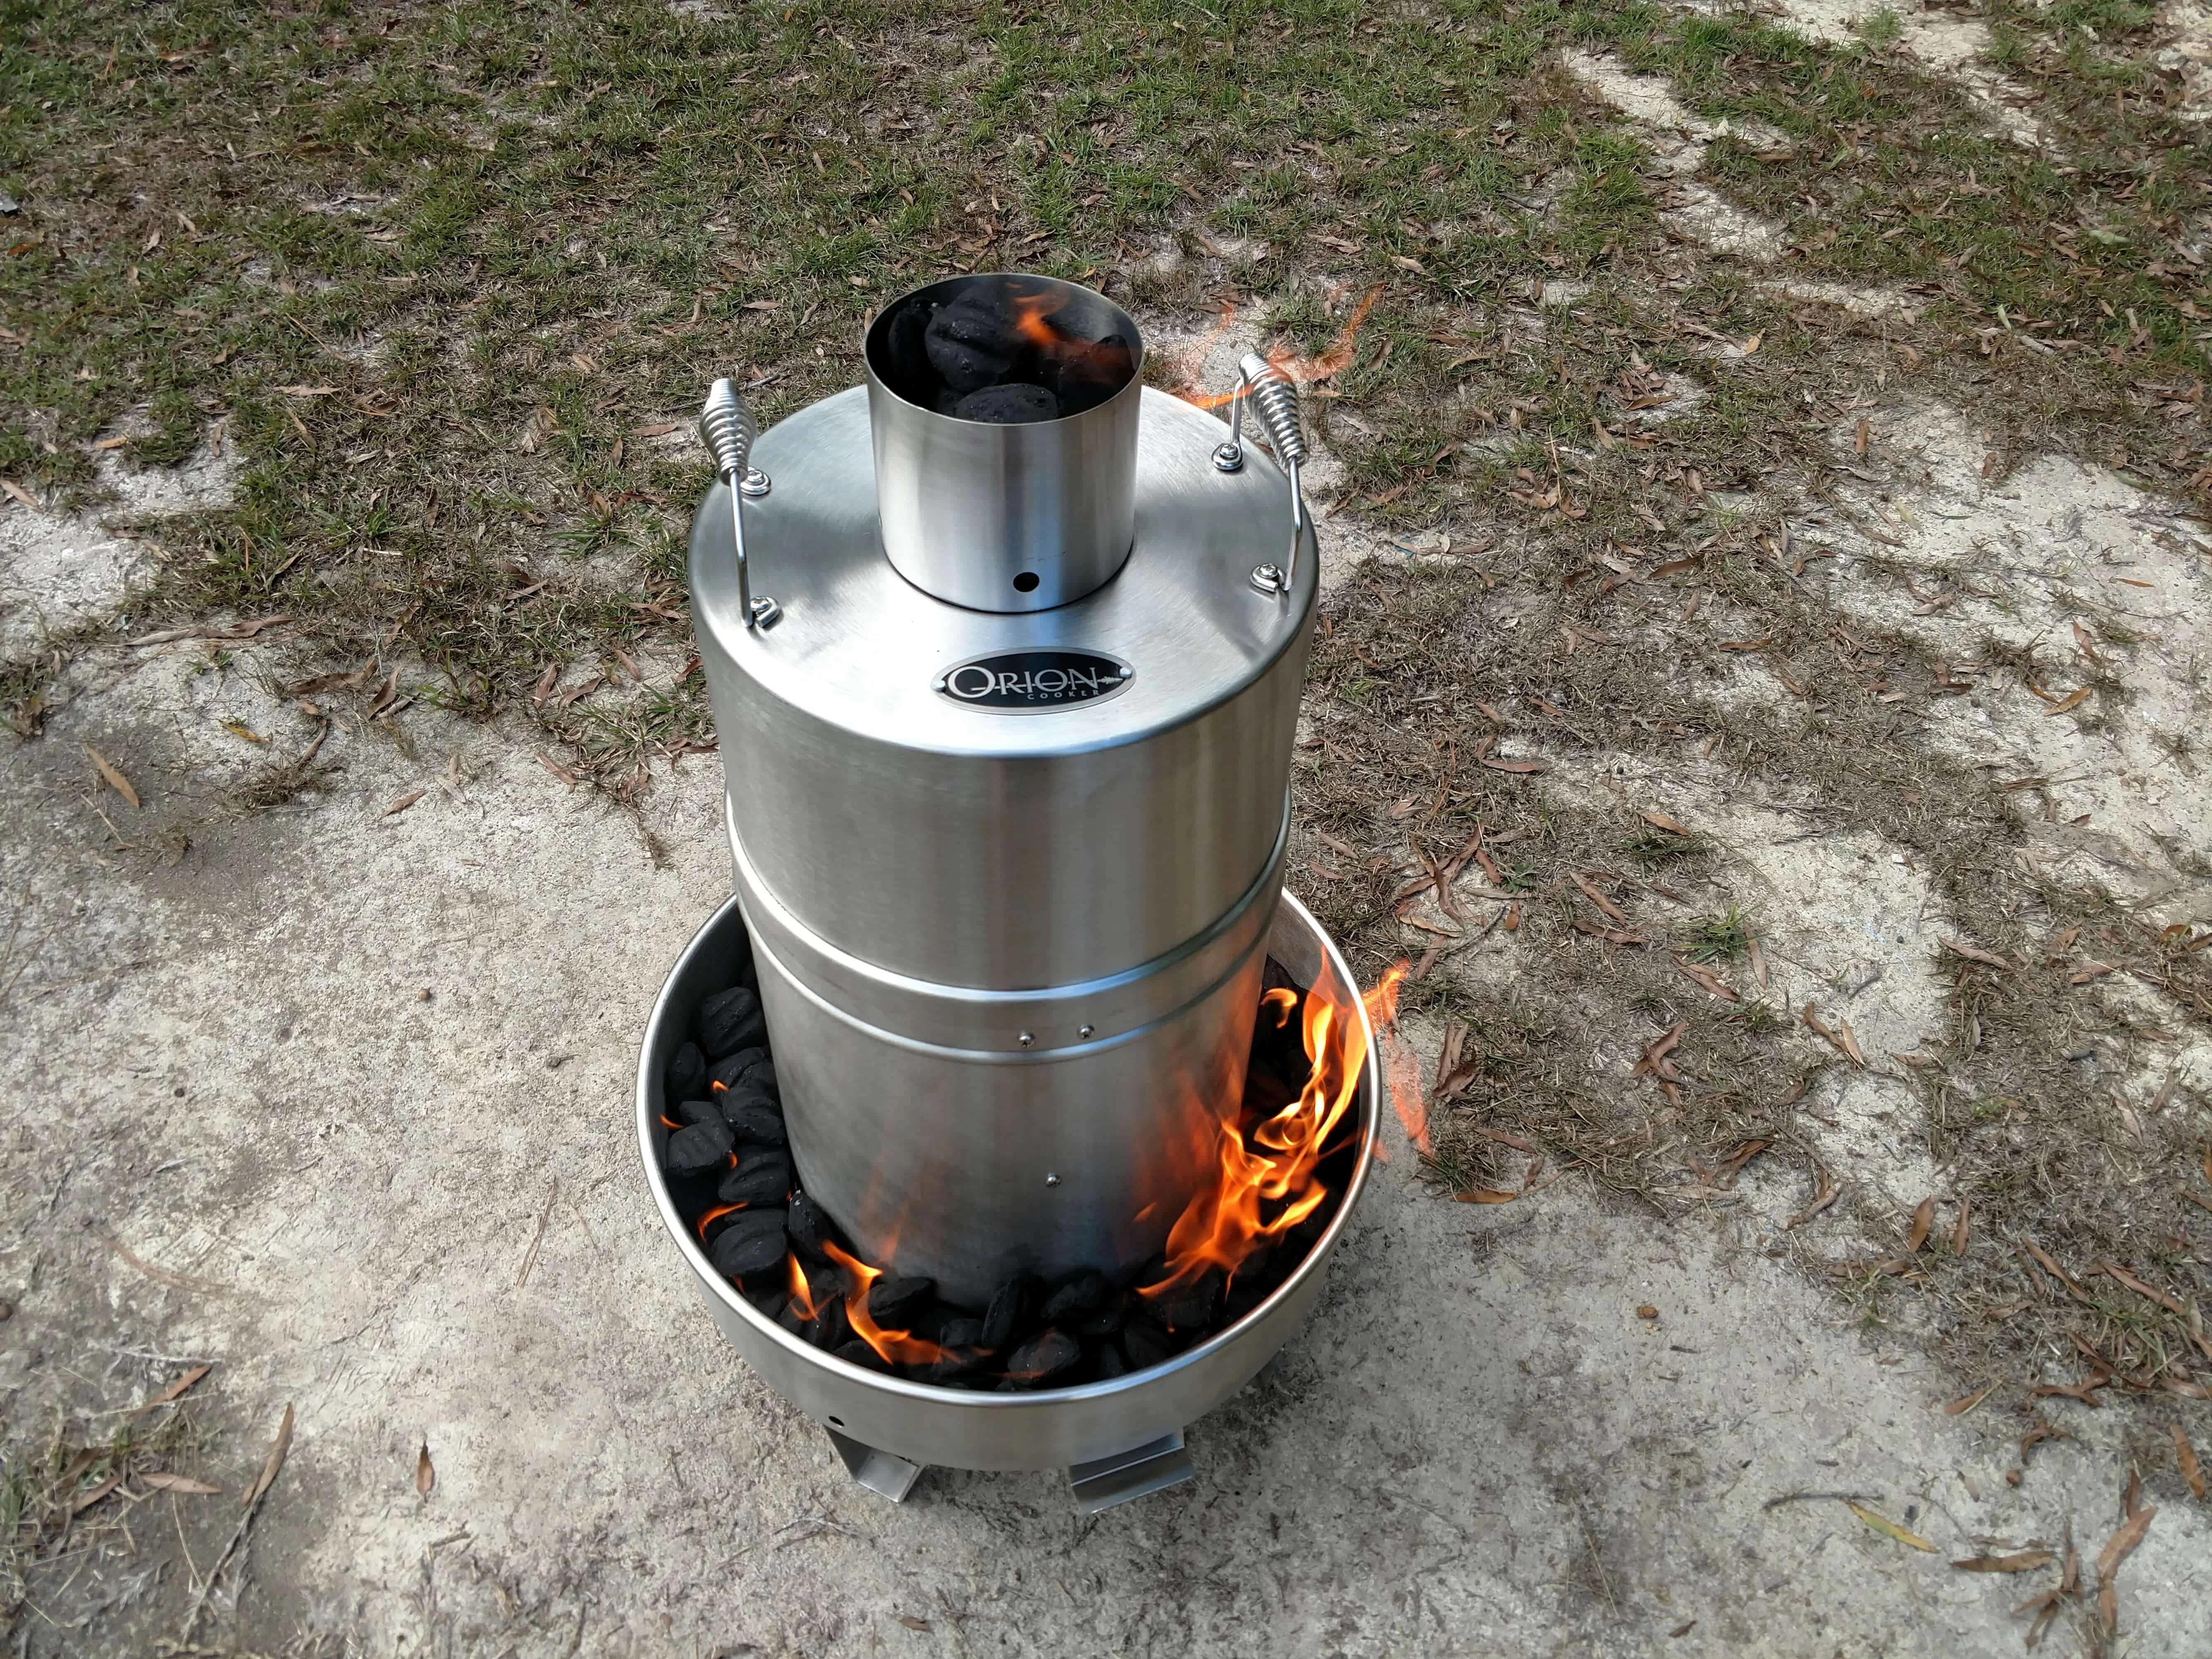 A Honest Review of The Orion Cooker.